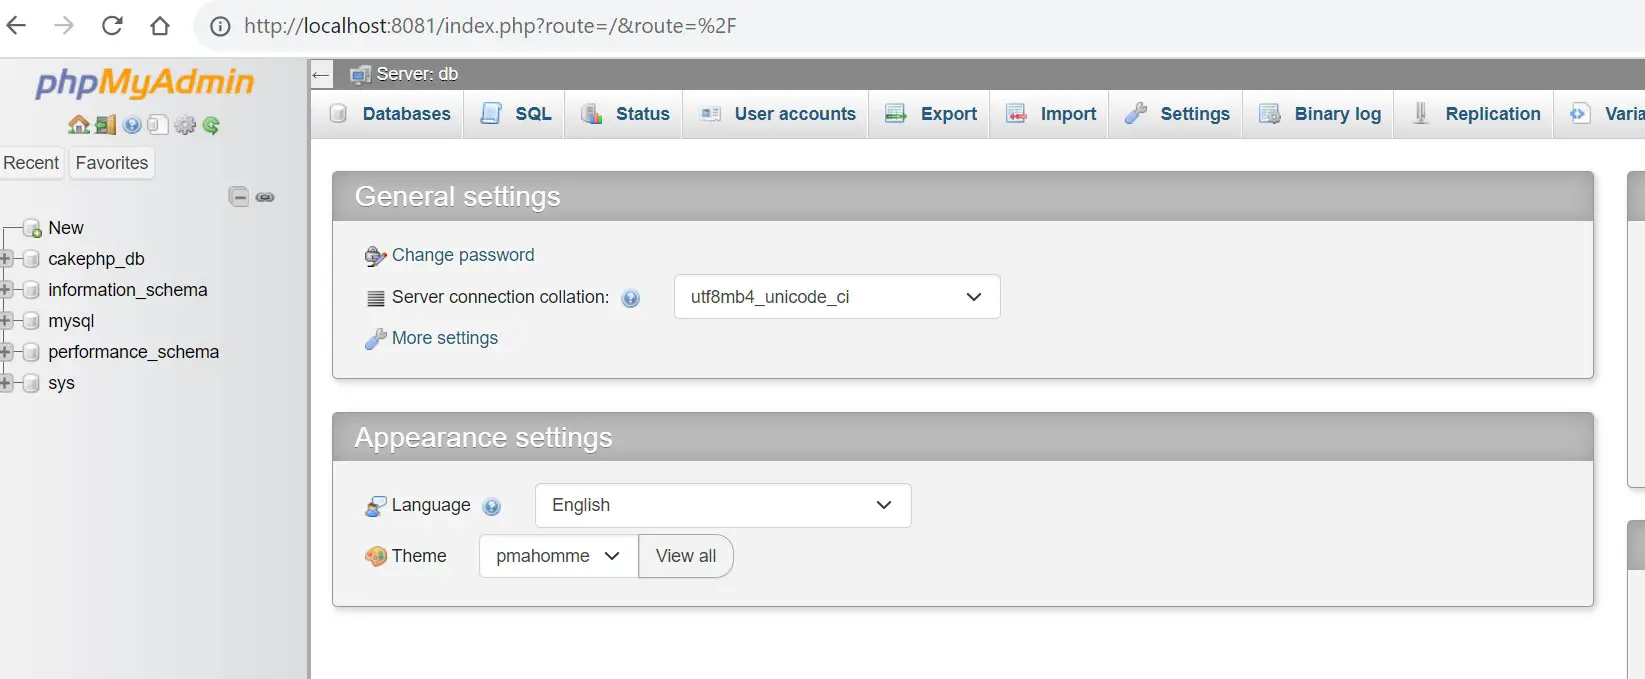 Easy CakePHP Docker Guide with Compose, Apache and MySQL